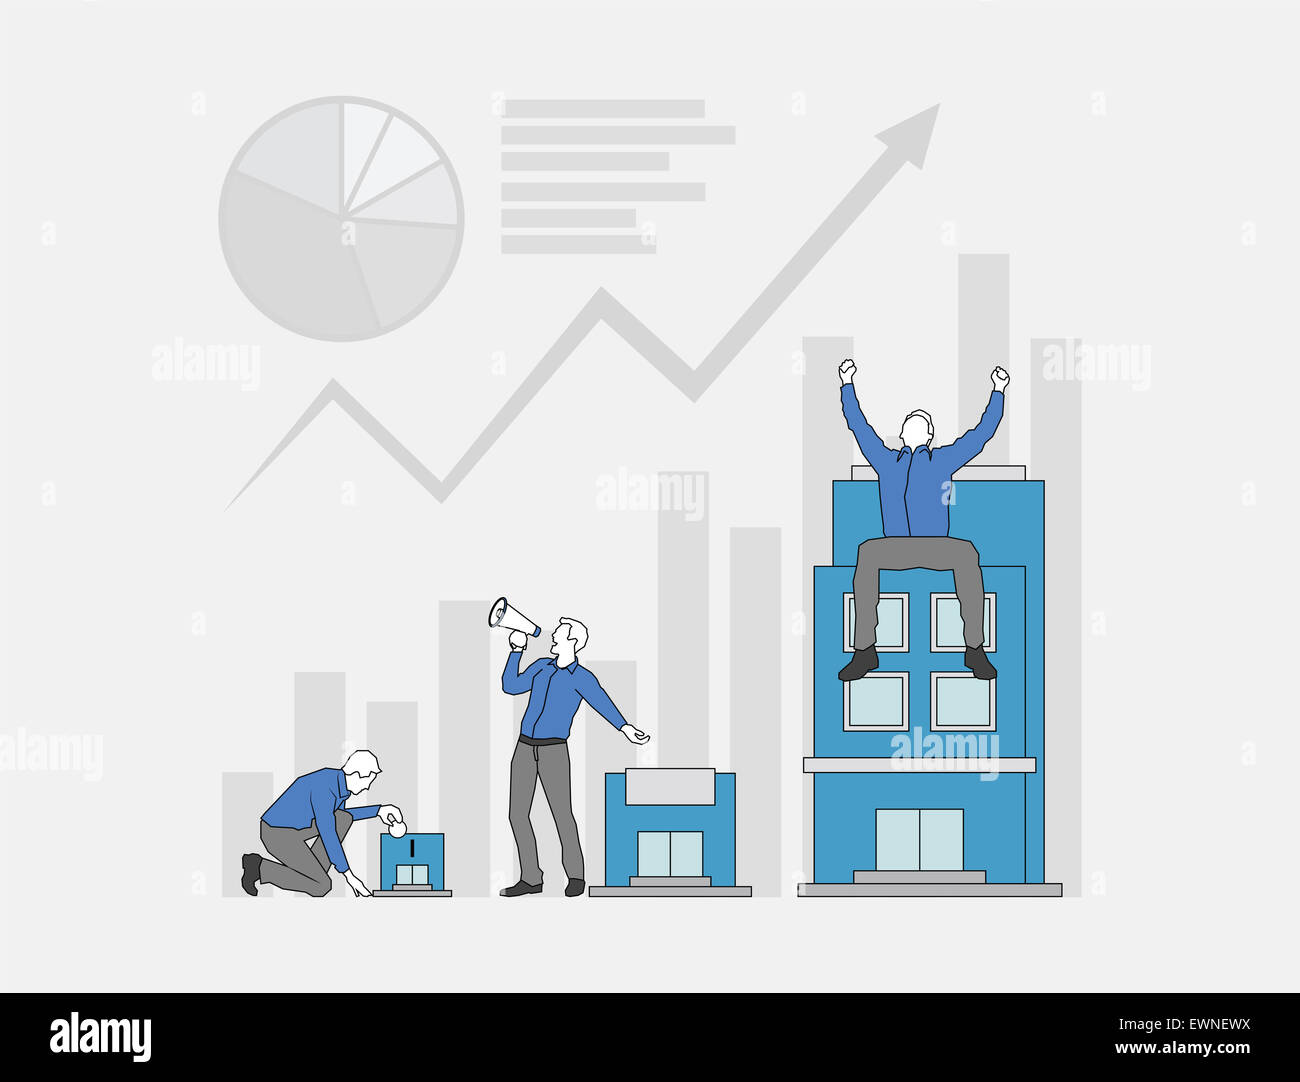 Multiple Image of businessman growth process in business profits Stock Photo